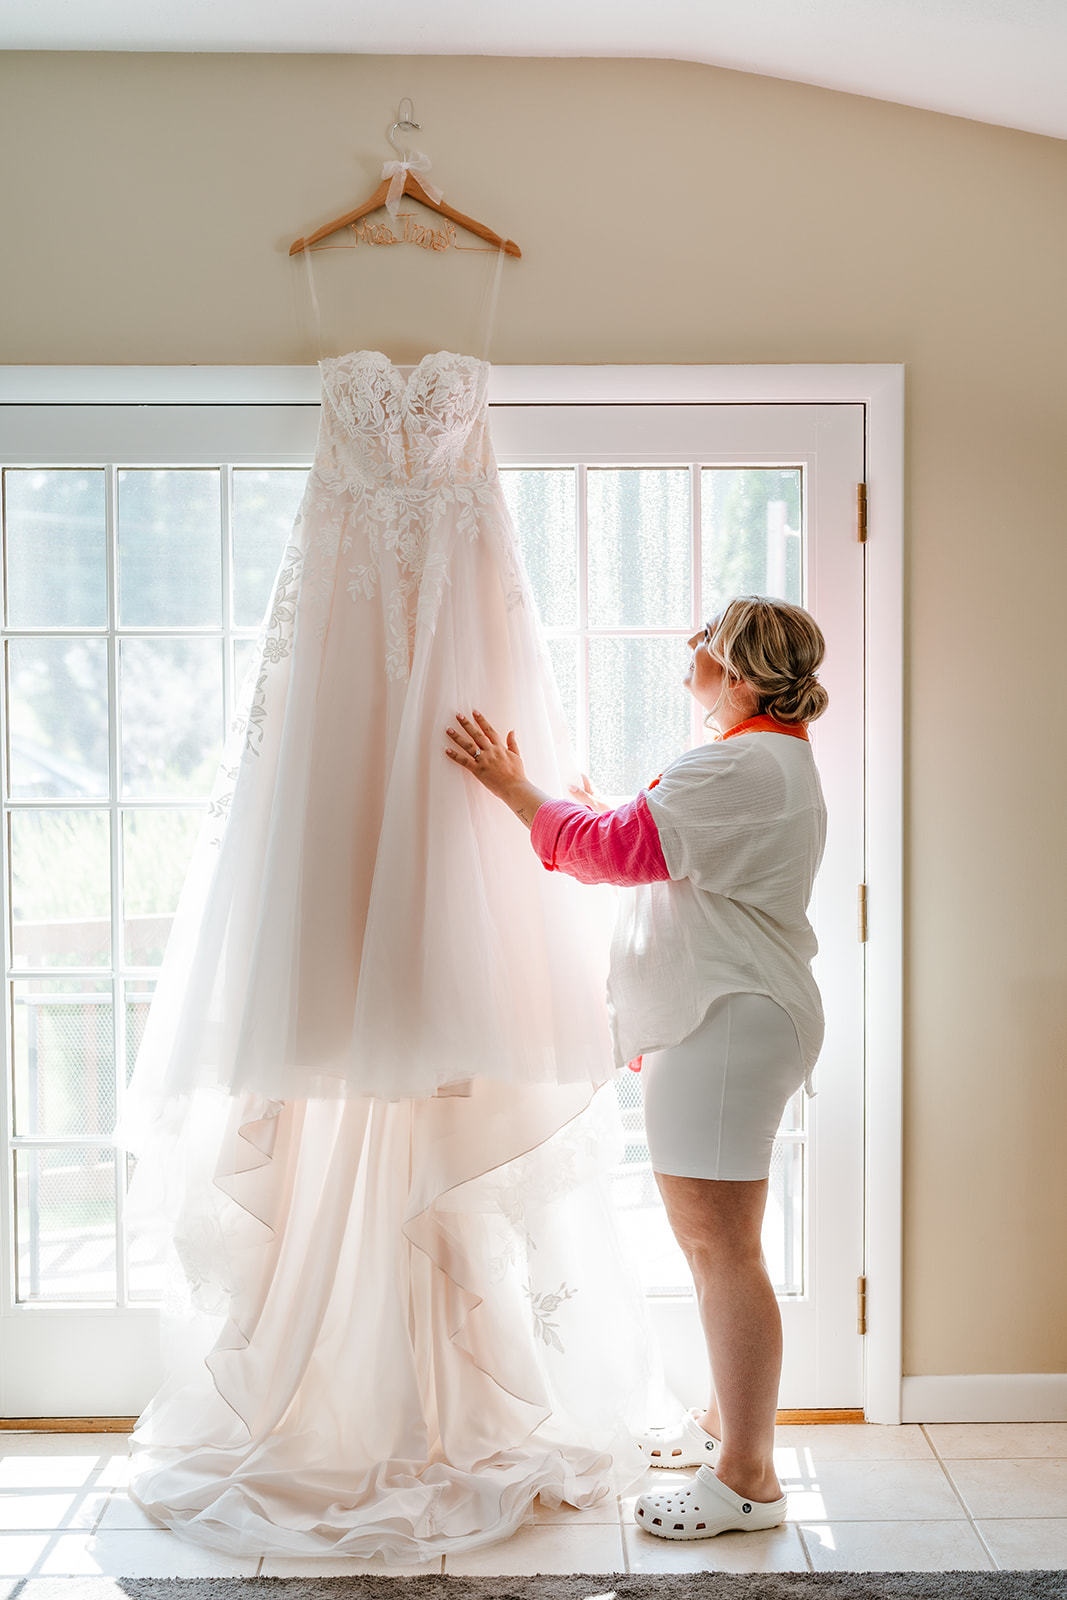 A woman in a white robe stands on tiptoe and reaches out to touch a white wedding dress hanging in front of a window in a well-lit room.